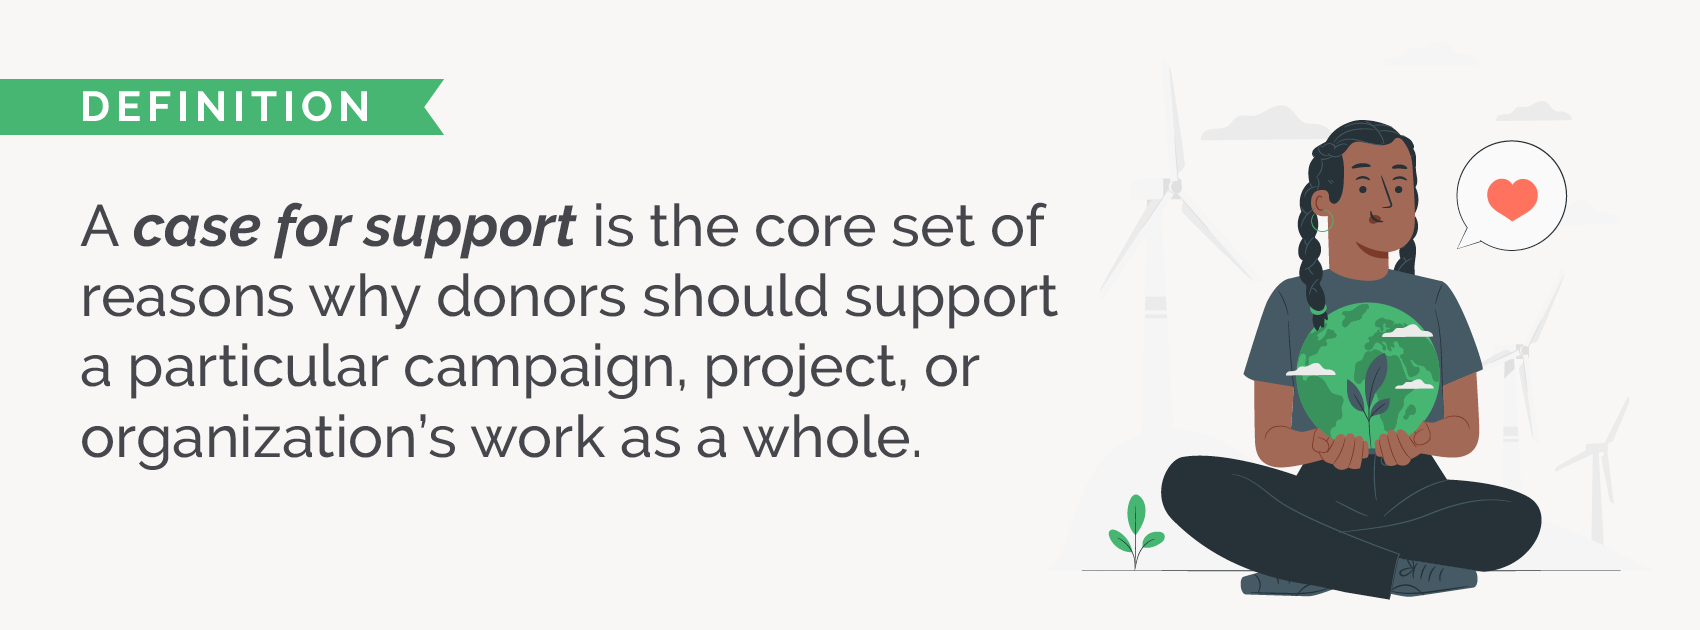 The definition of "Case for support," detailed in the text below